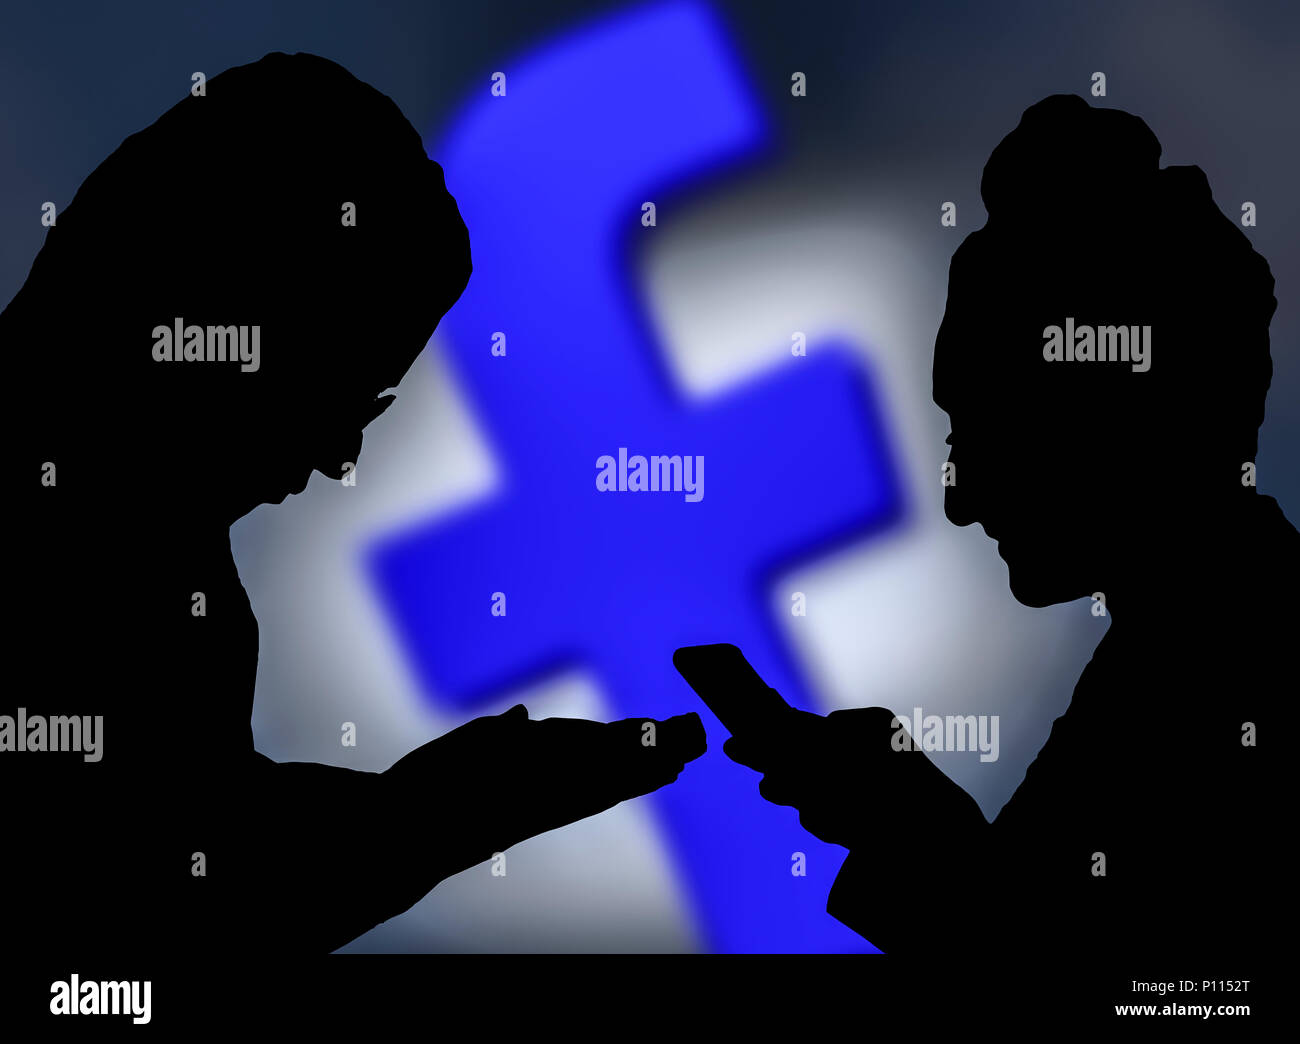 Silhouettes of a couple of people using the Facebook app on smartphones. Stock Photo